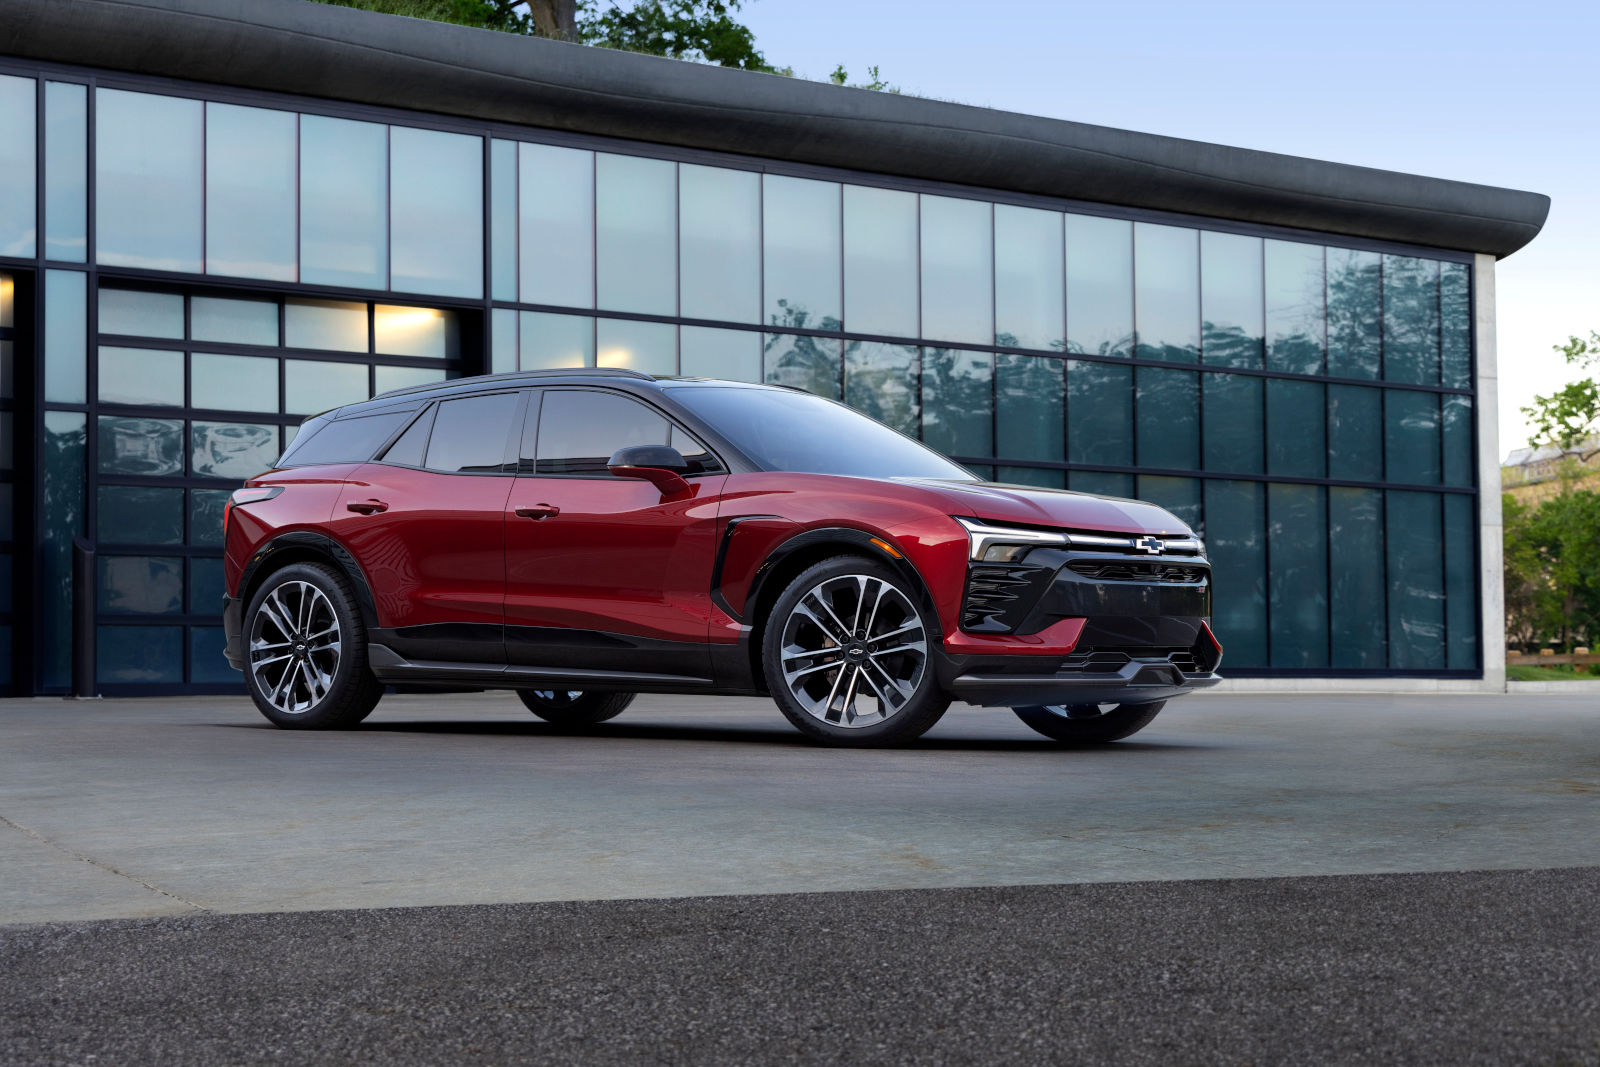 What can we expect from the 2024 Chevrolet Blazer EV?